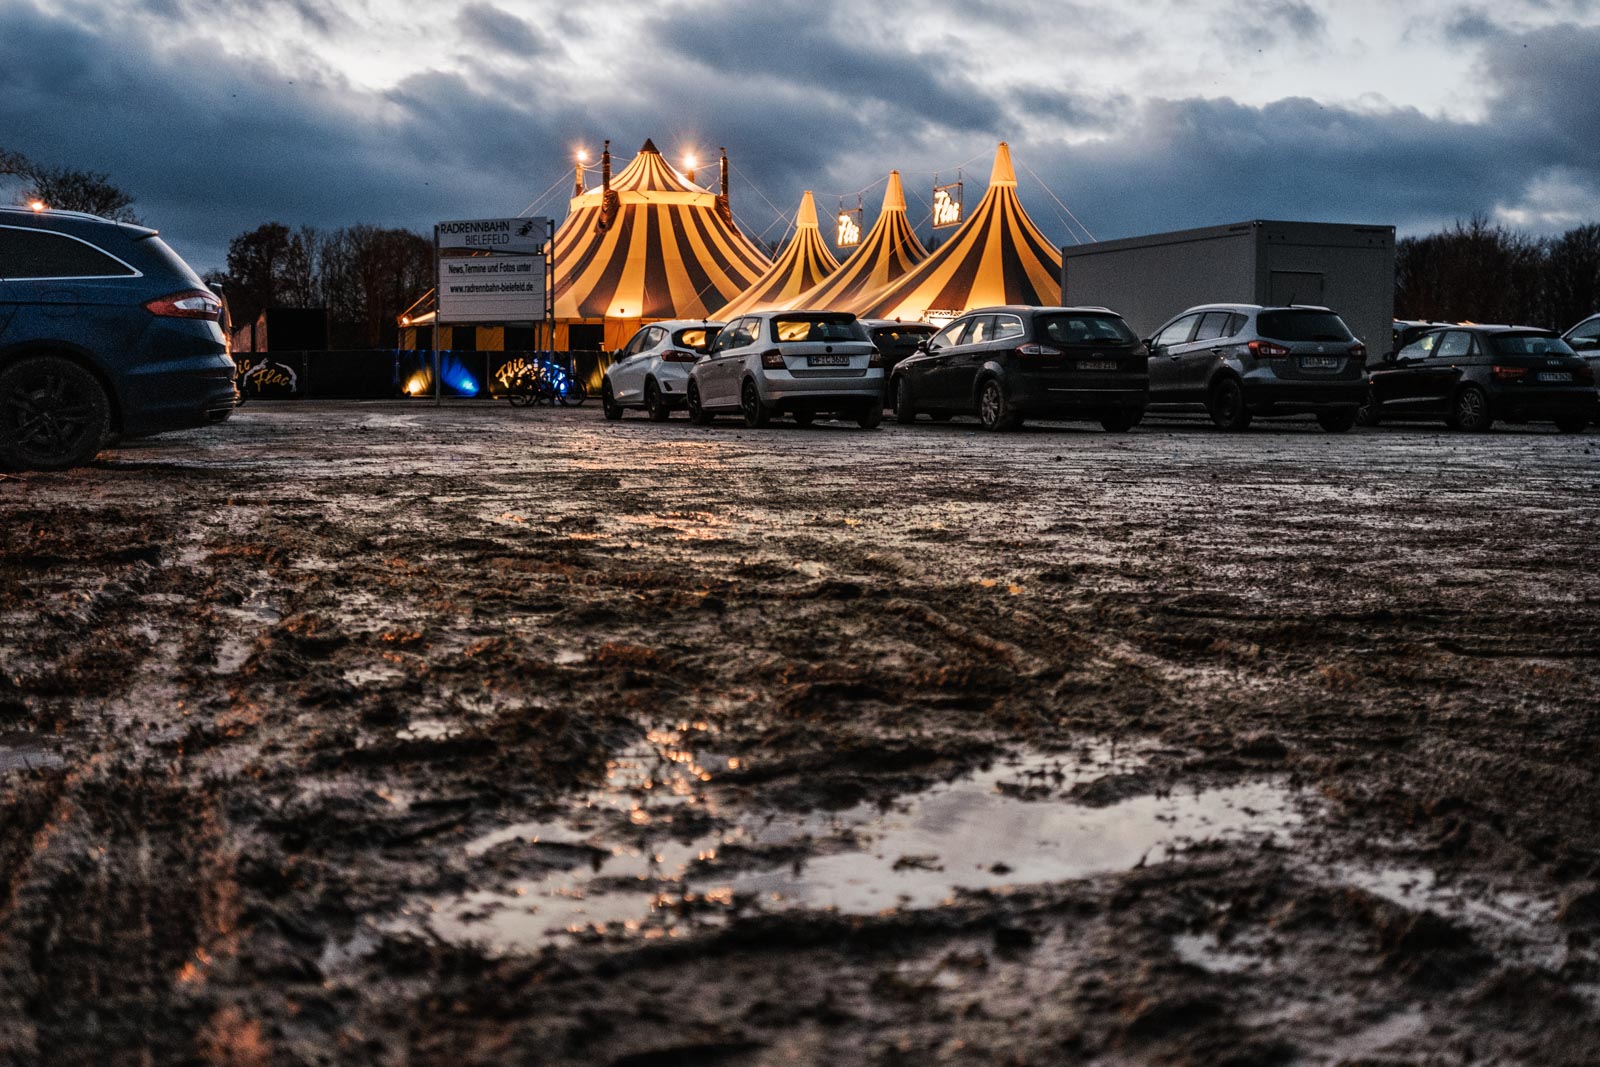 Circus in the town on New Year's Eve 2021 (Bielefeld, Germany).